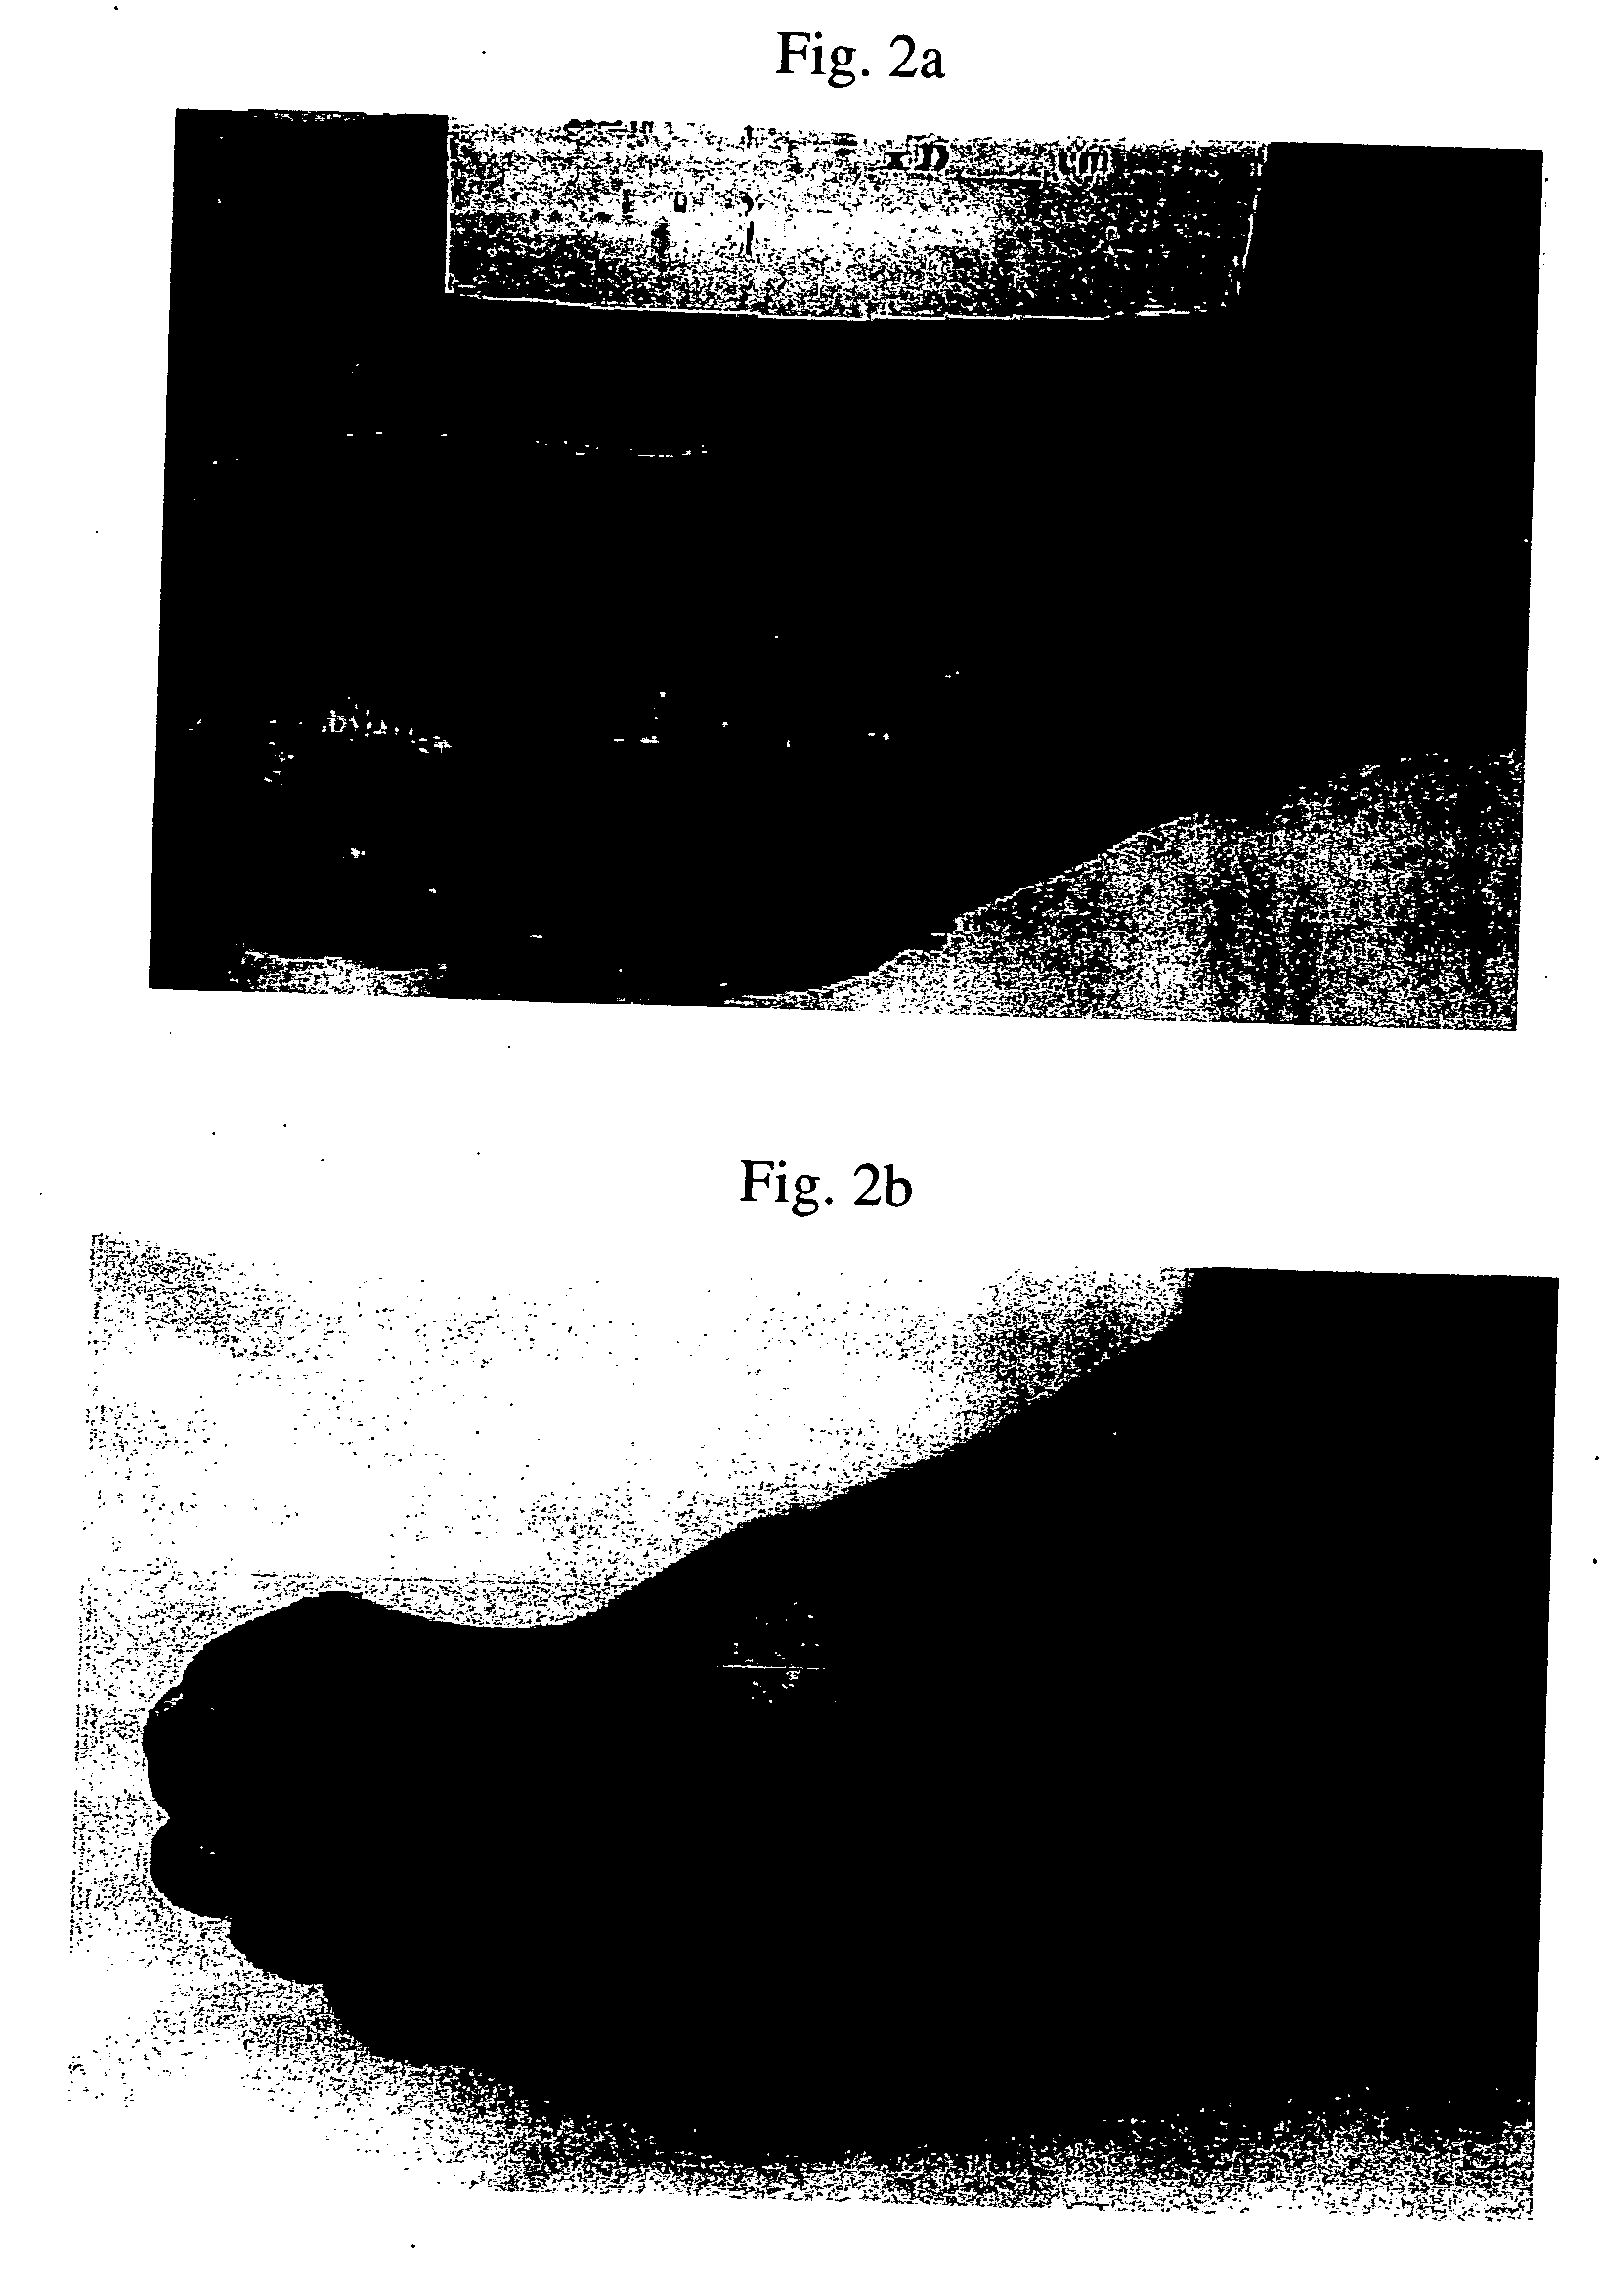 Compositions for disrupting and inhibiting reconstitution of wound biofilm